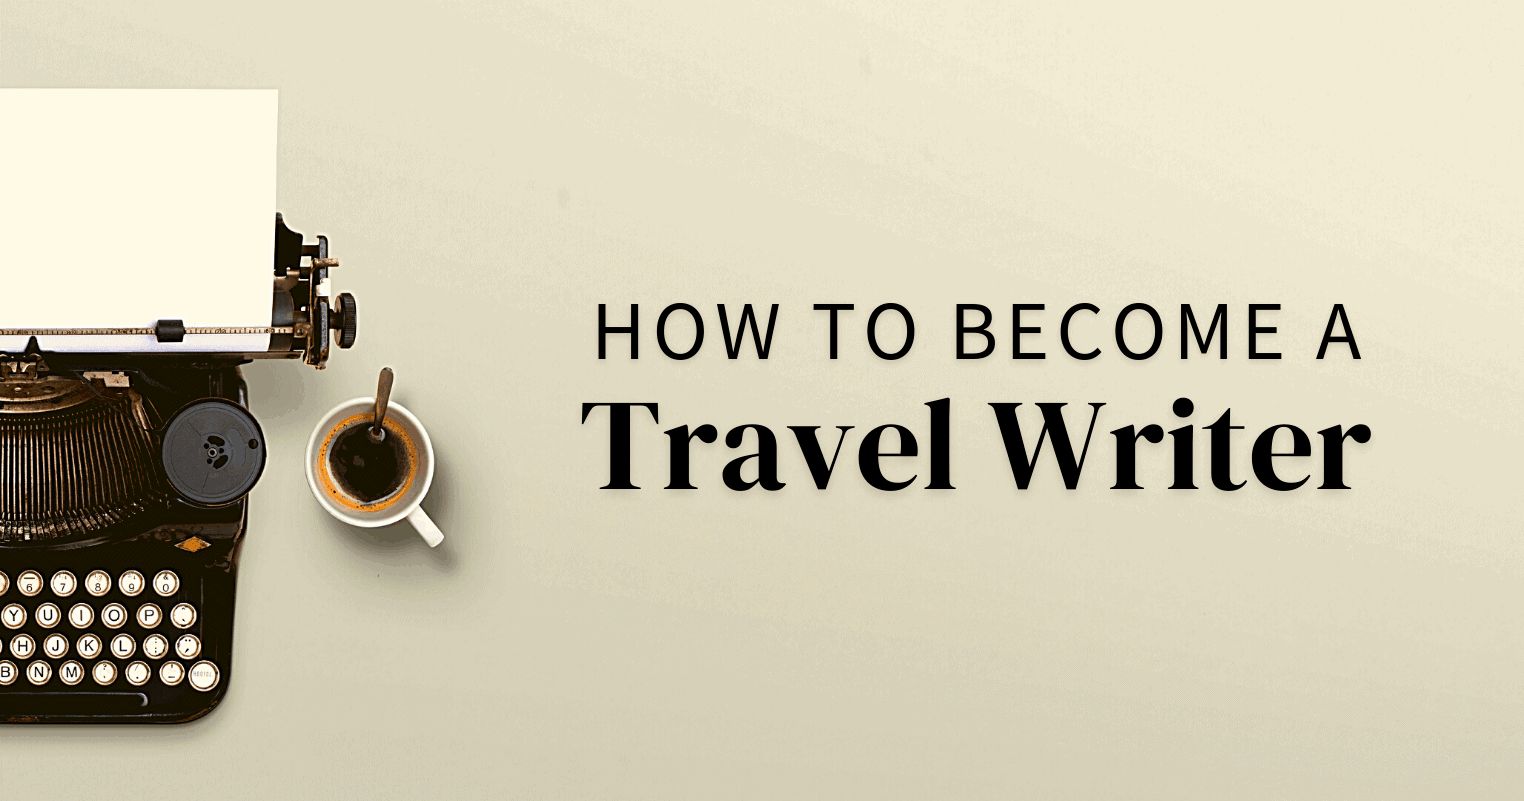 How to become a travel writer into image